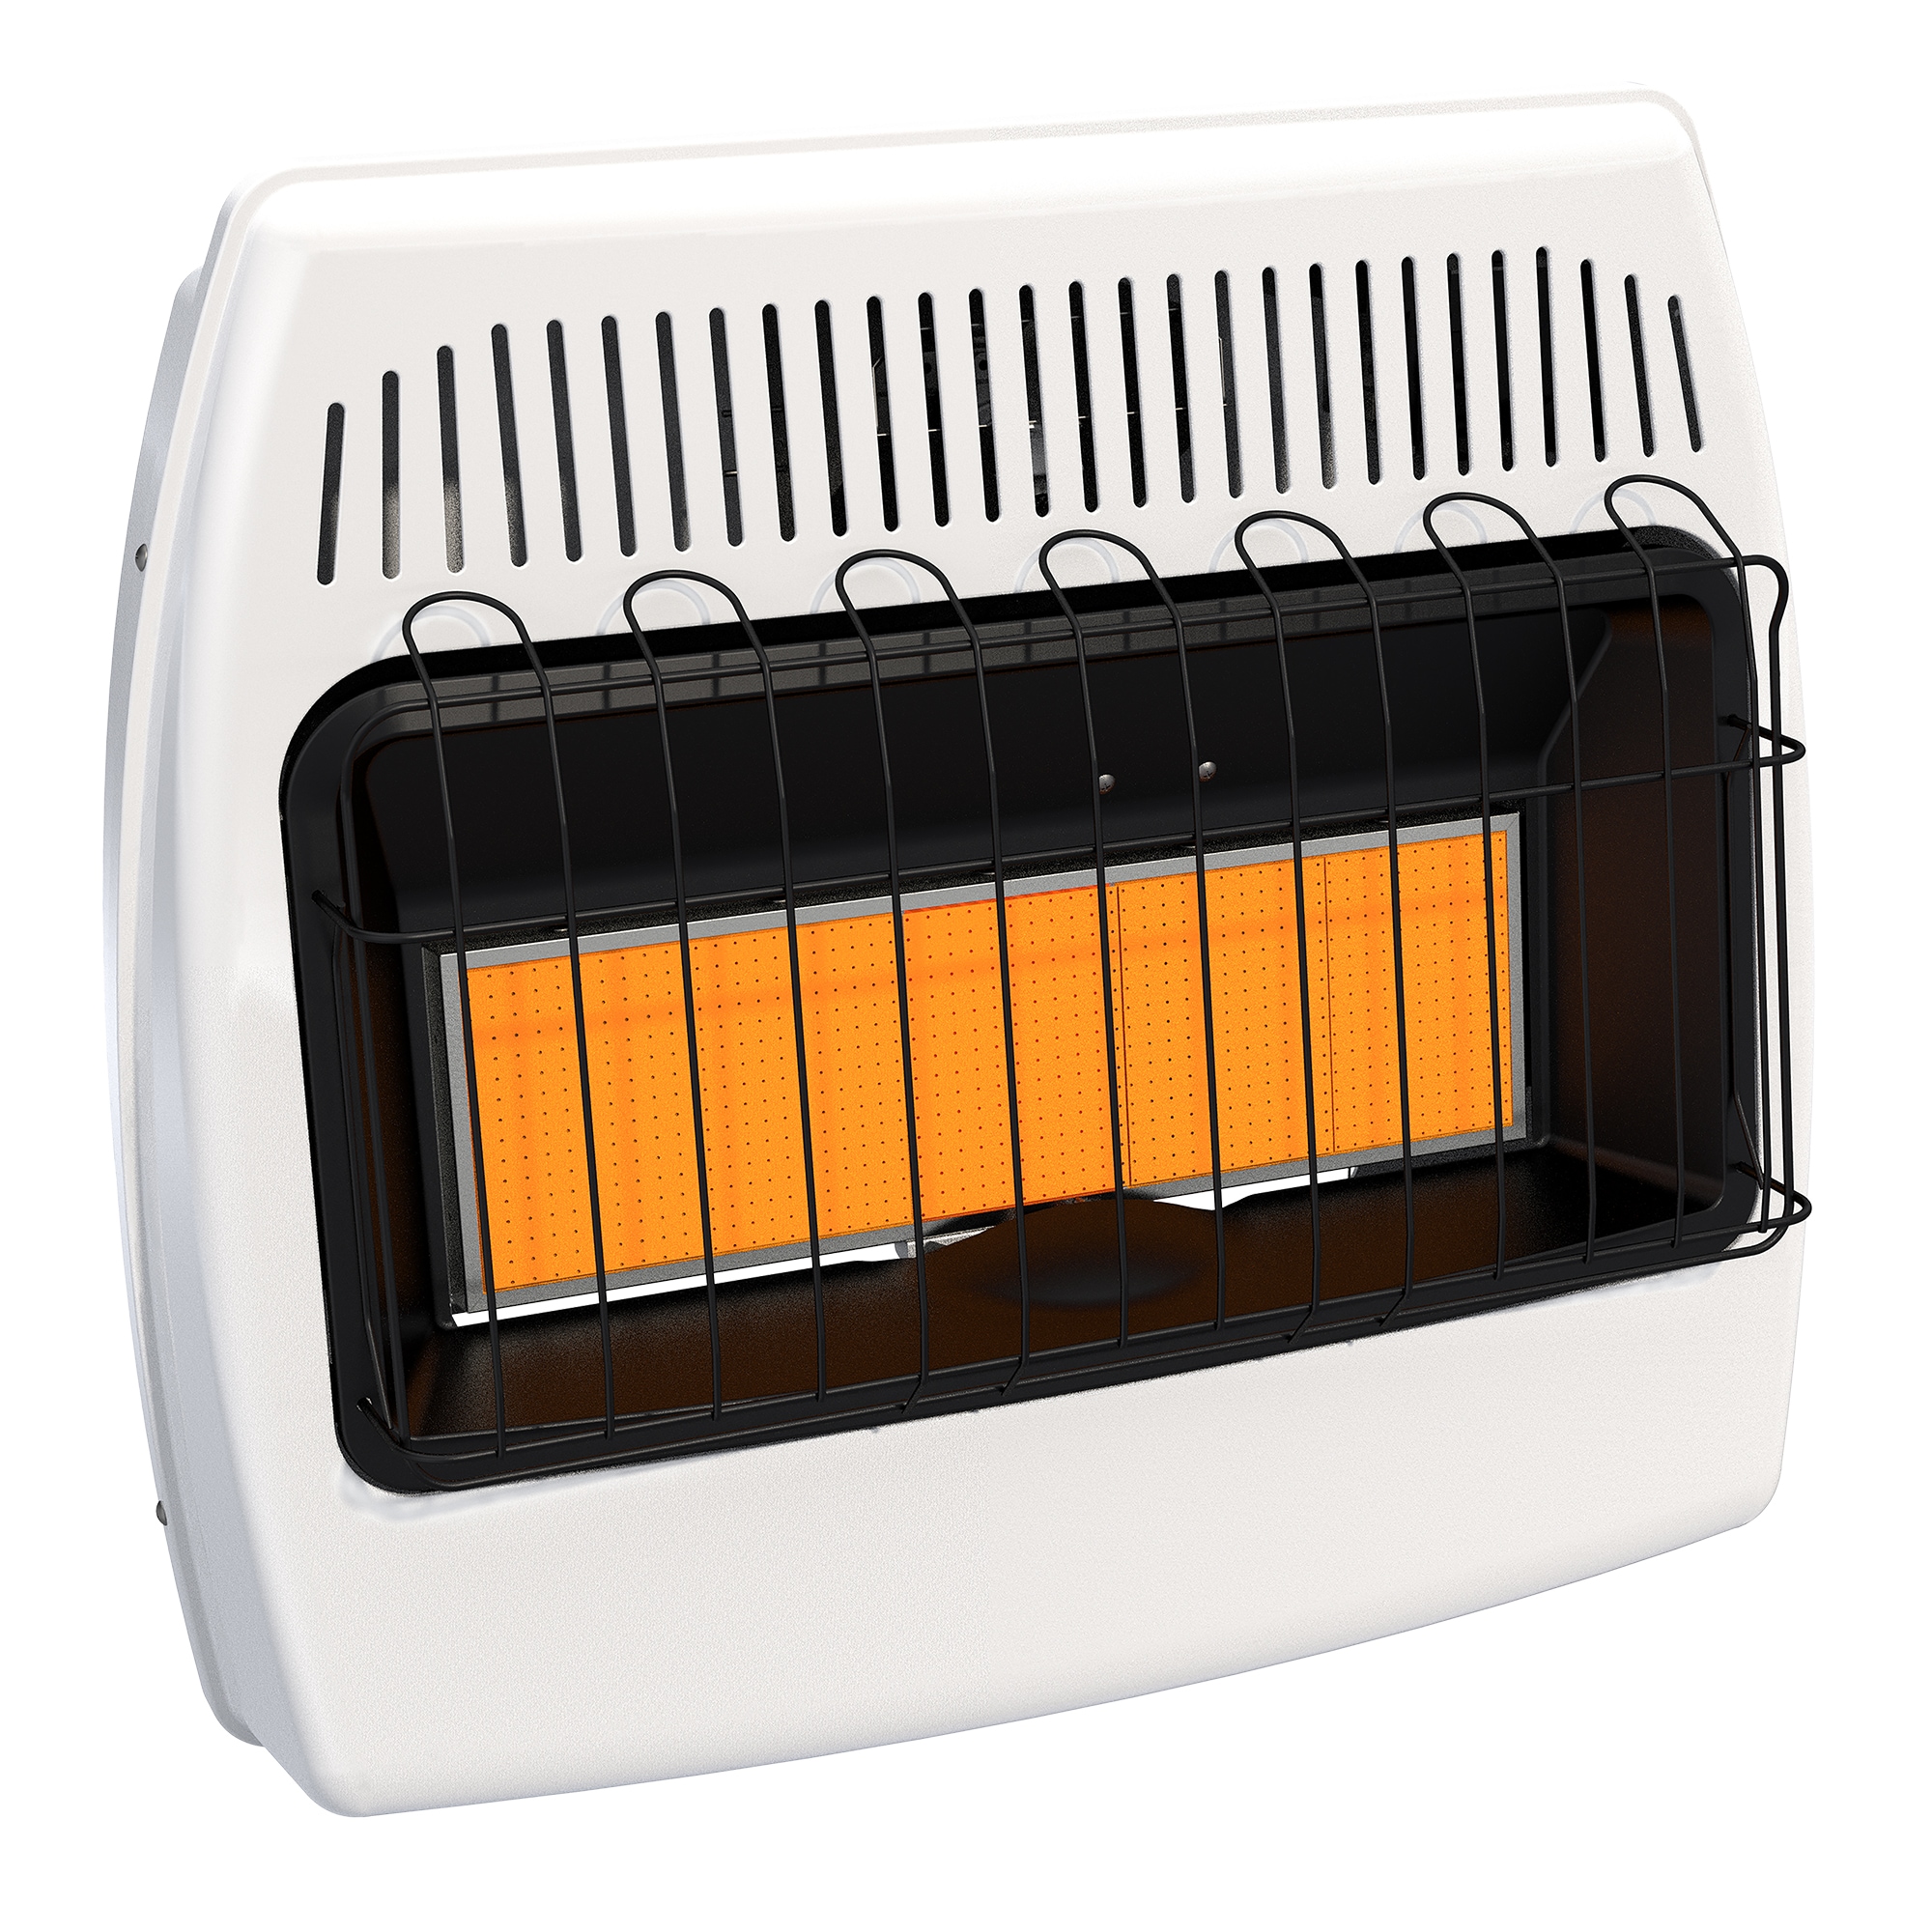  WEBUP Propane Space Radiant Heater Portable Indoor Gas